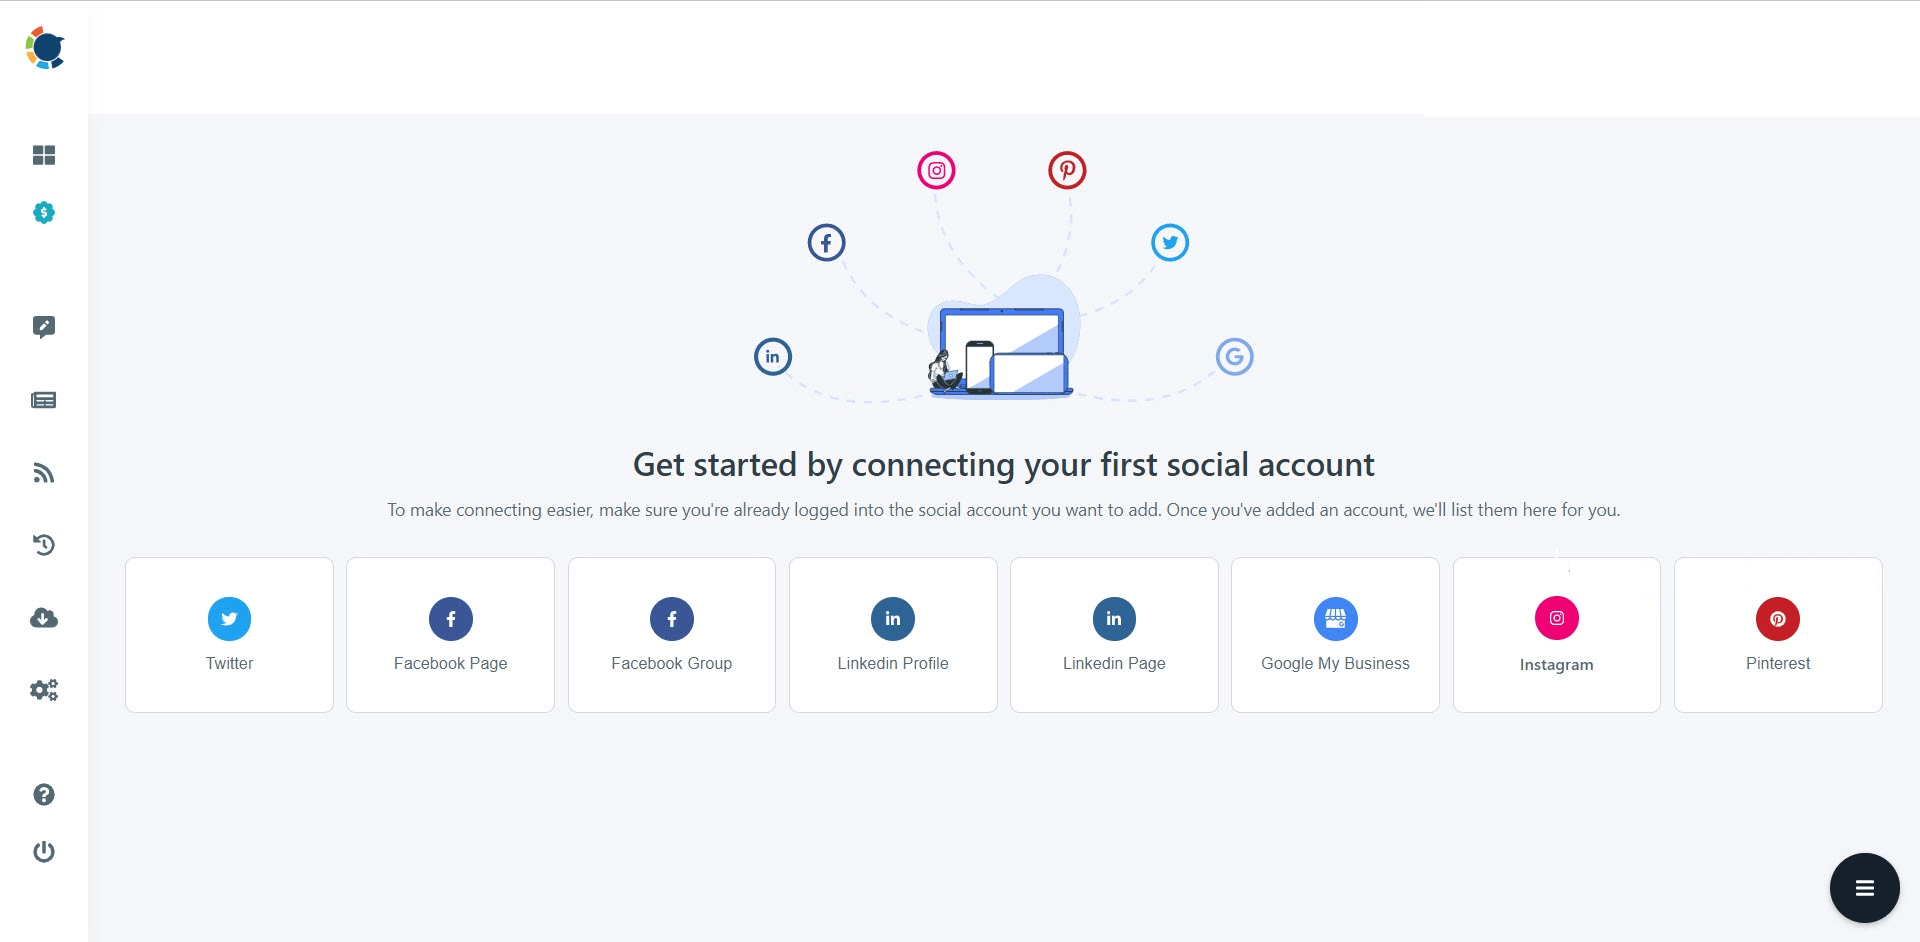 Circleboom Publish supports Pinterest, Twitter, Instagram, Facebook, LinkedIn, and Google Business Profile on the same dashboard.